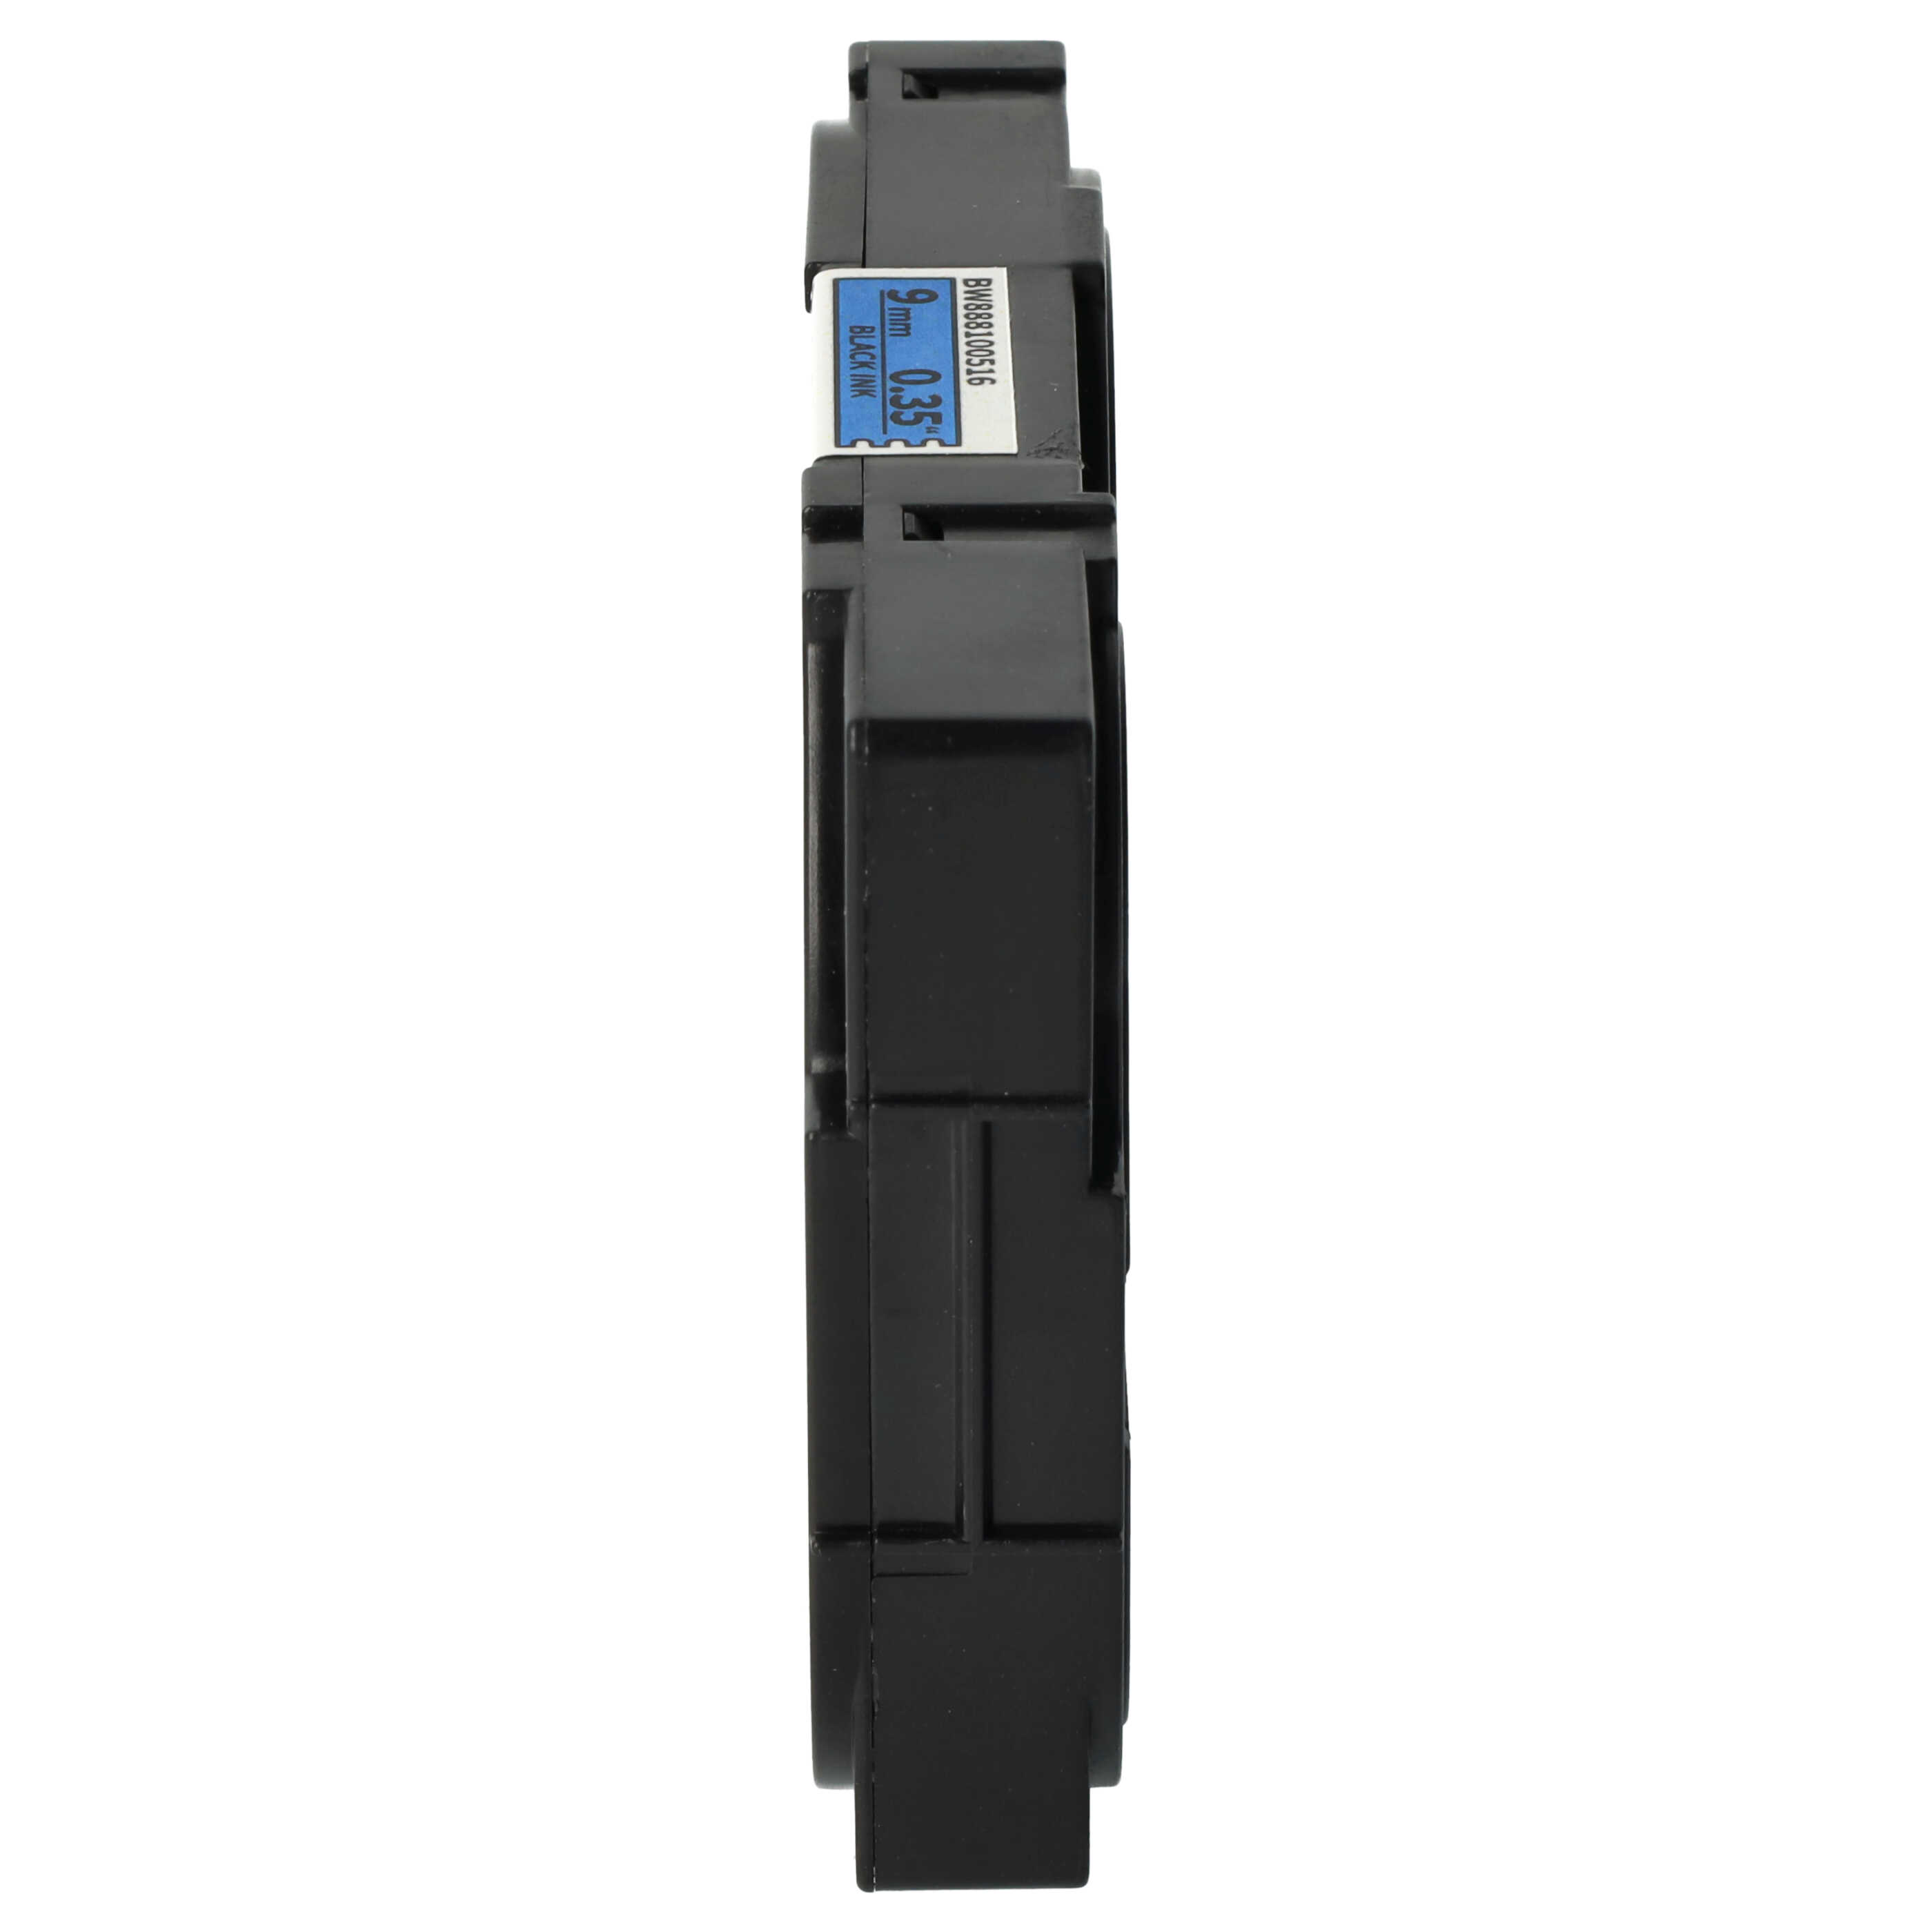 Label Tape as Replacement for Brother TZeFX521, TZ-FX521, TZE-FX521, TZFX521 - 9 mm Black to Blue, Flexible